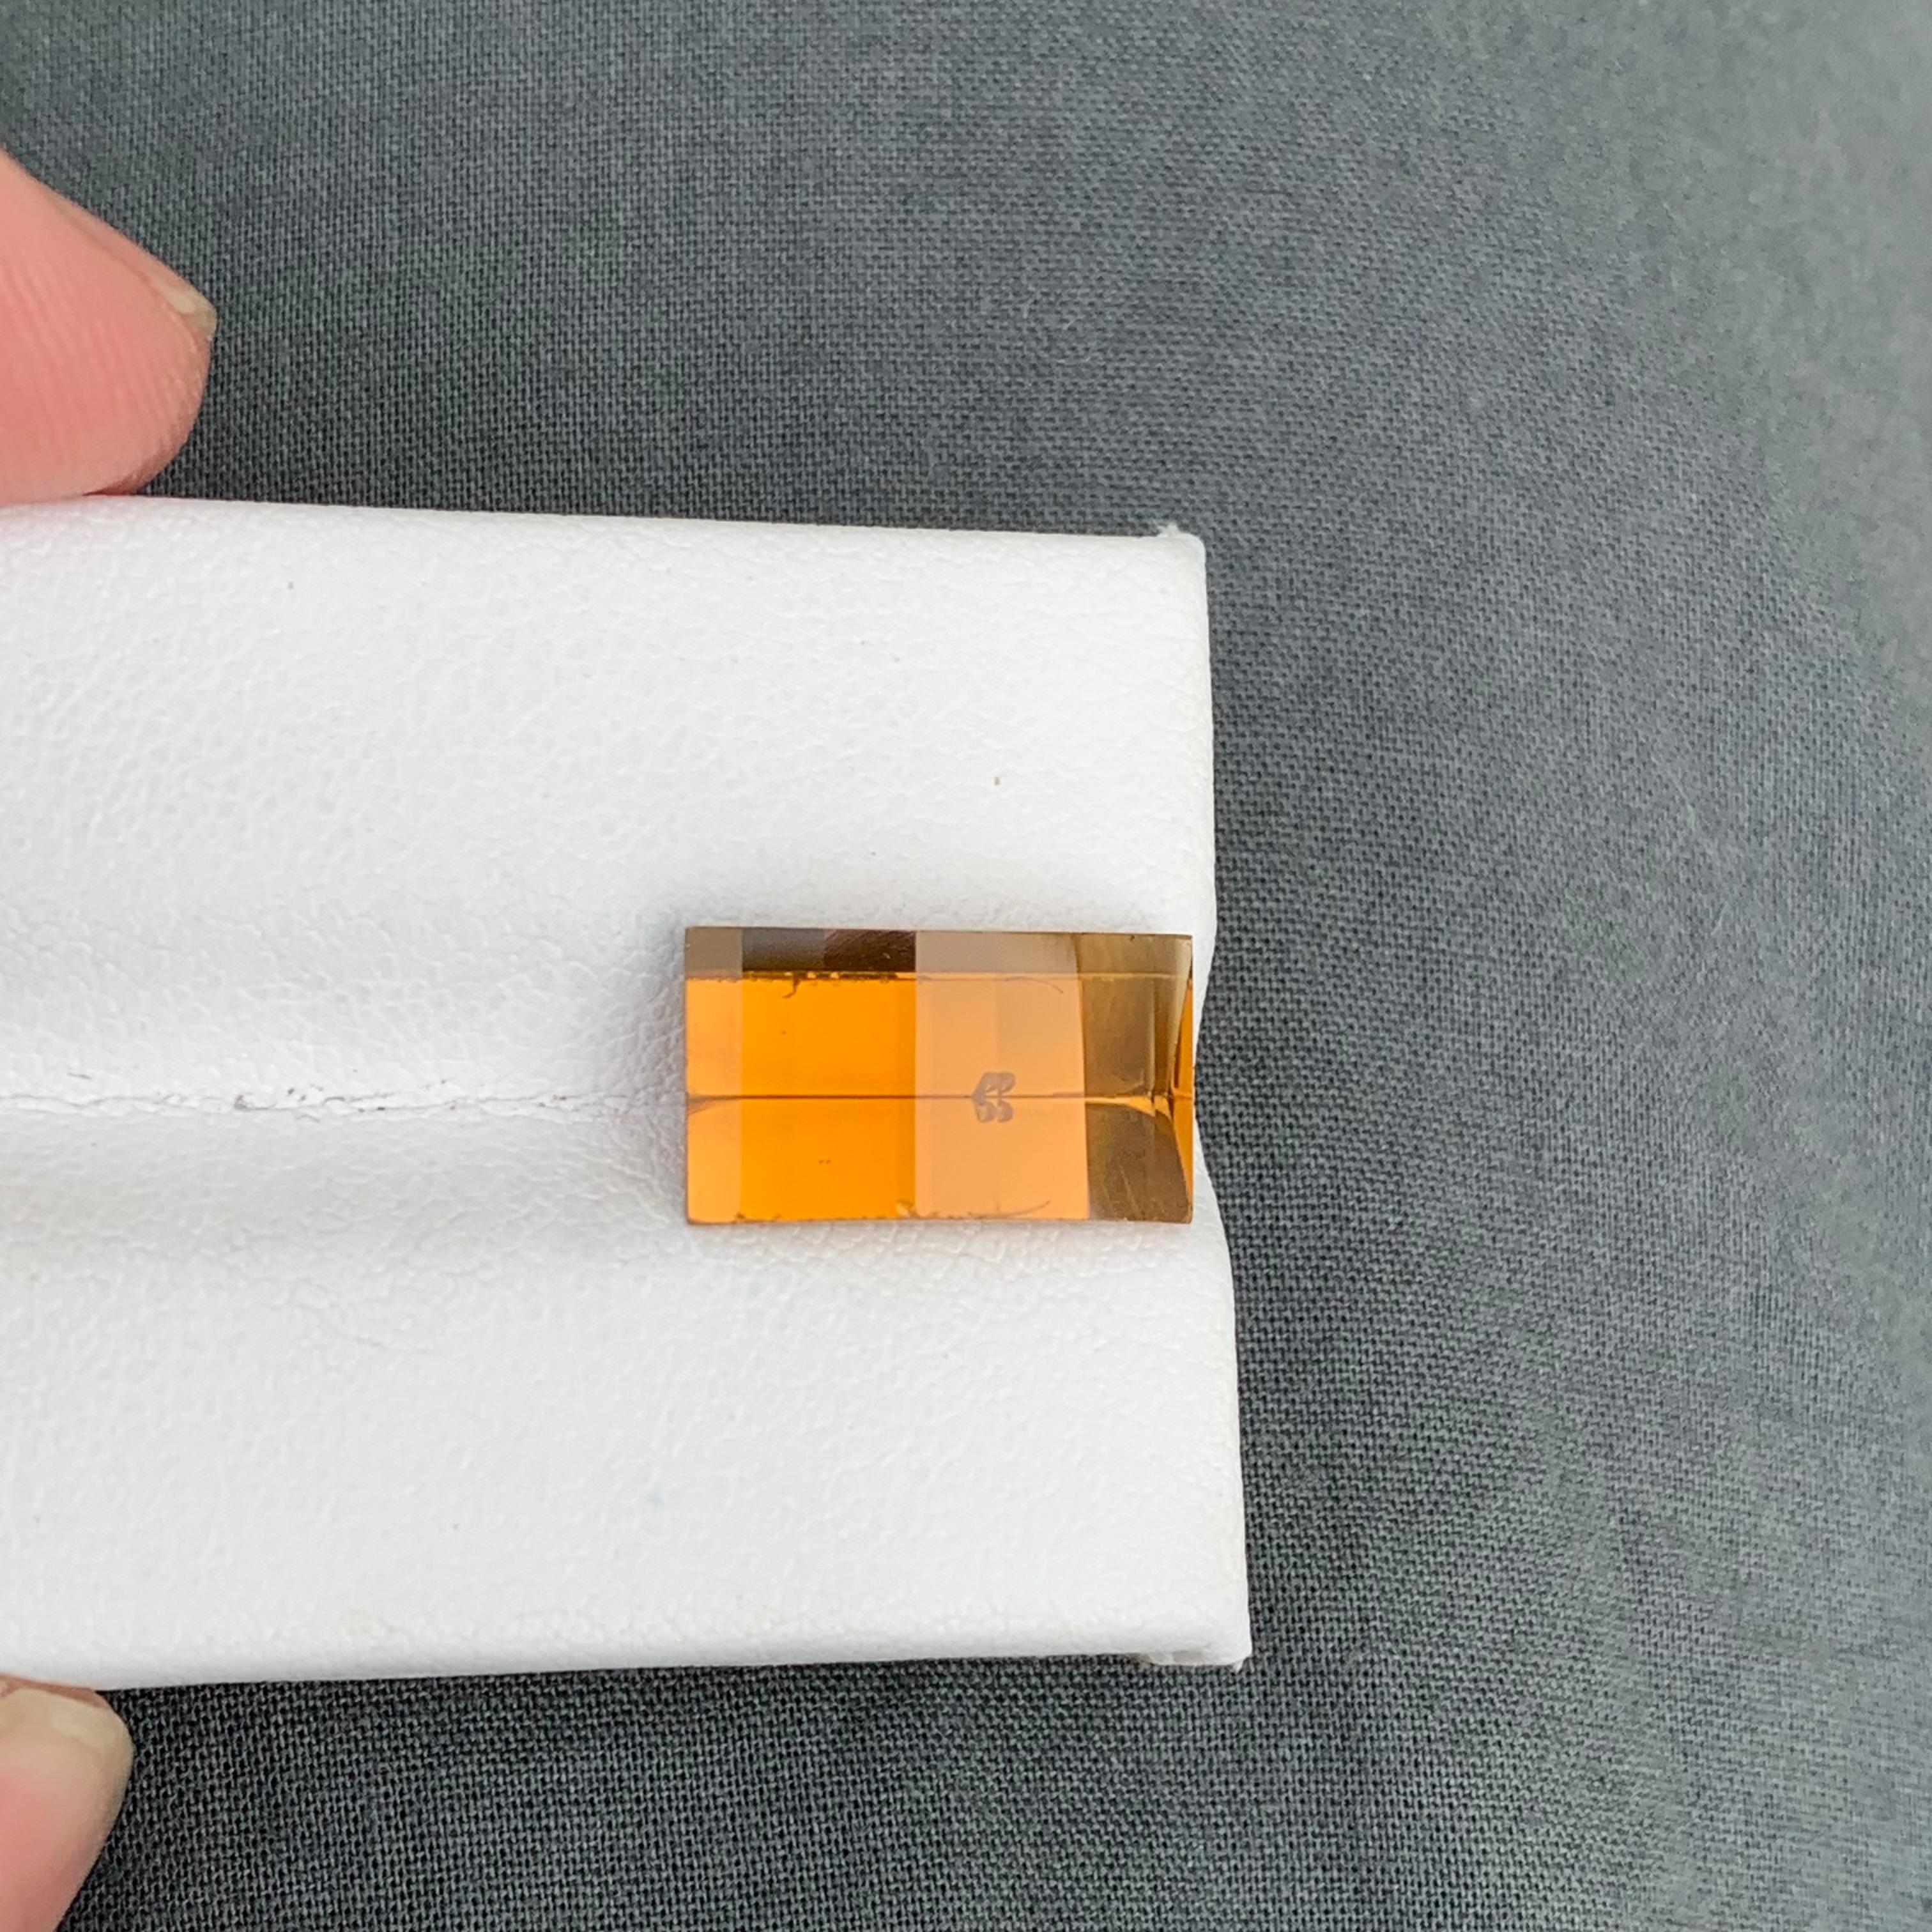 6.75 Carat Natural Loose Pixel Cut CItrine Gemstone From Brazil For Sale 5